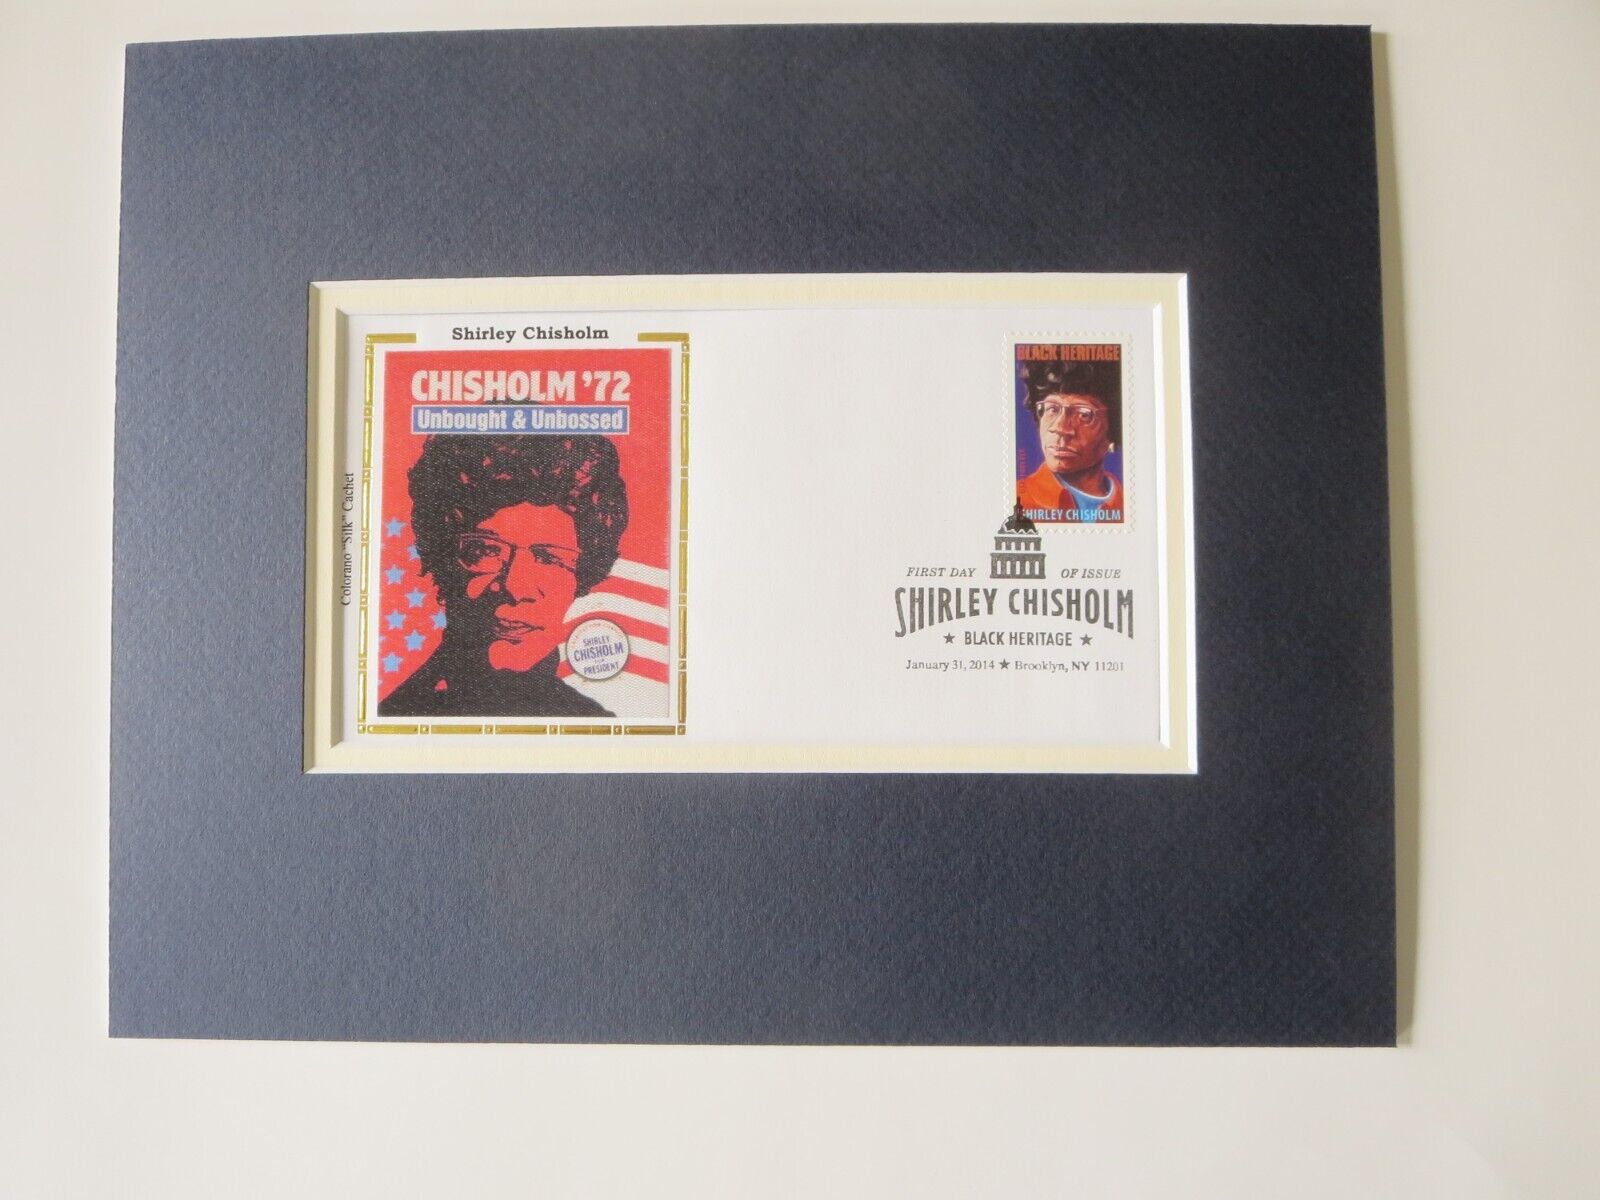 Shirley Chisholm - First Black Woman elected to Congress & First day Cover